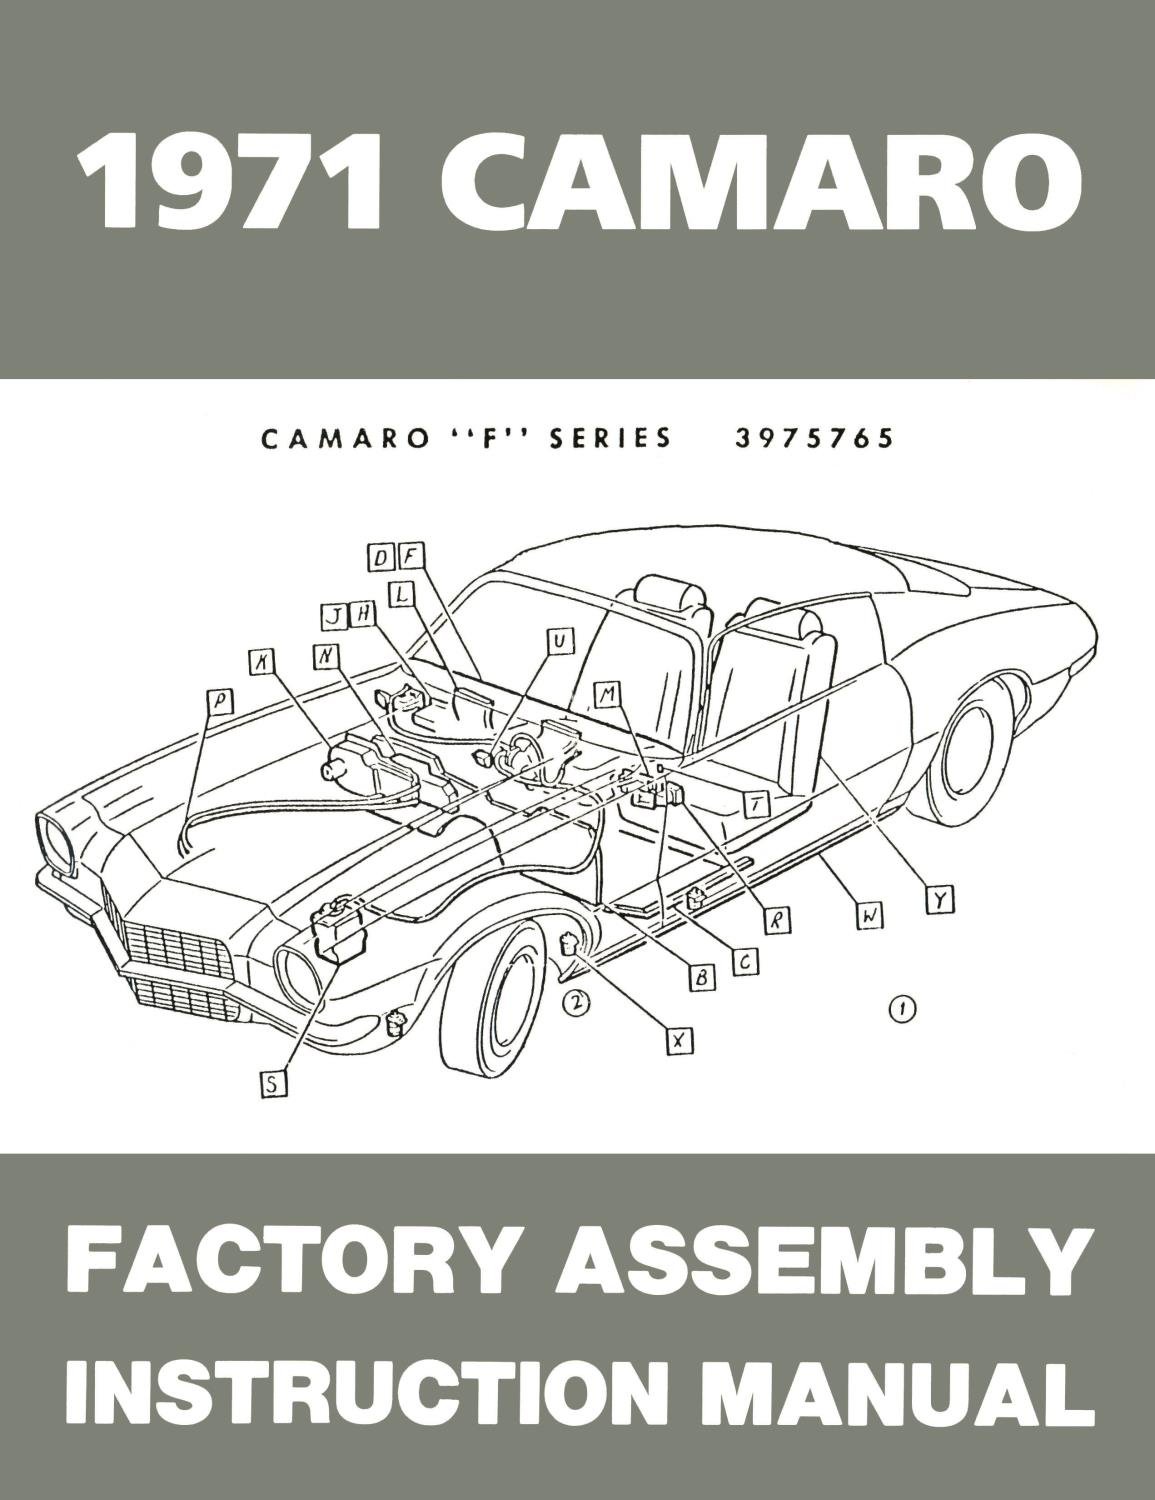 Factory Assembly Instruction Manual for 1971 Chevrolet Camaro